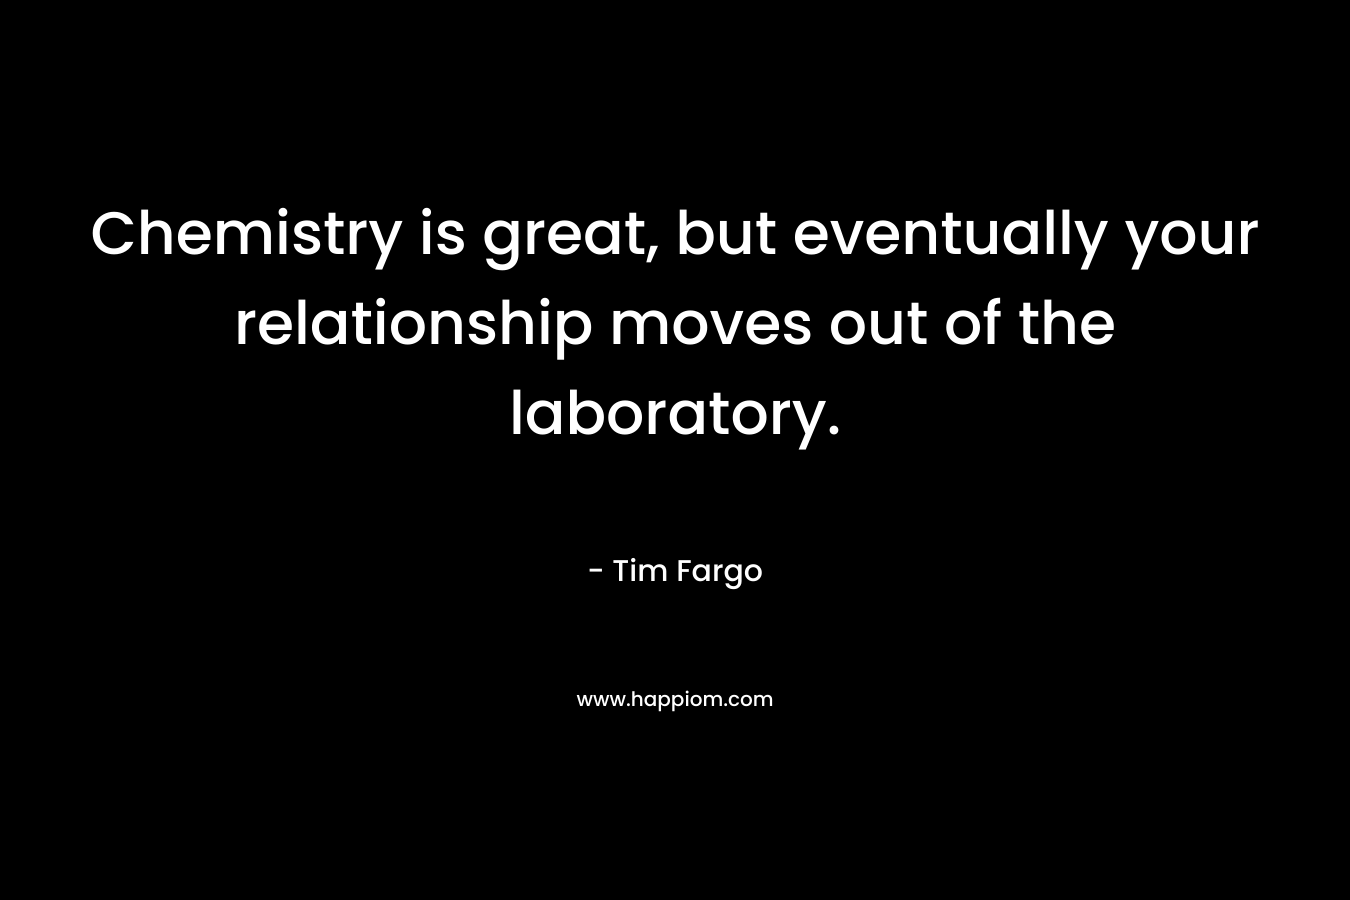 Chemistry is great, but eventually your relationship moves out of the laboratory. – Tim Fargo